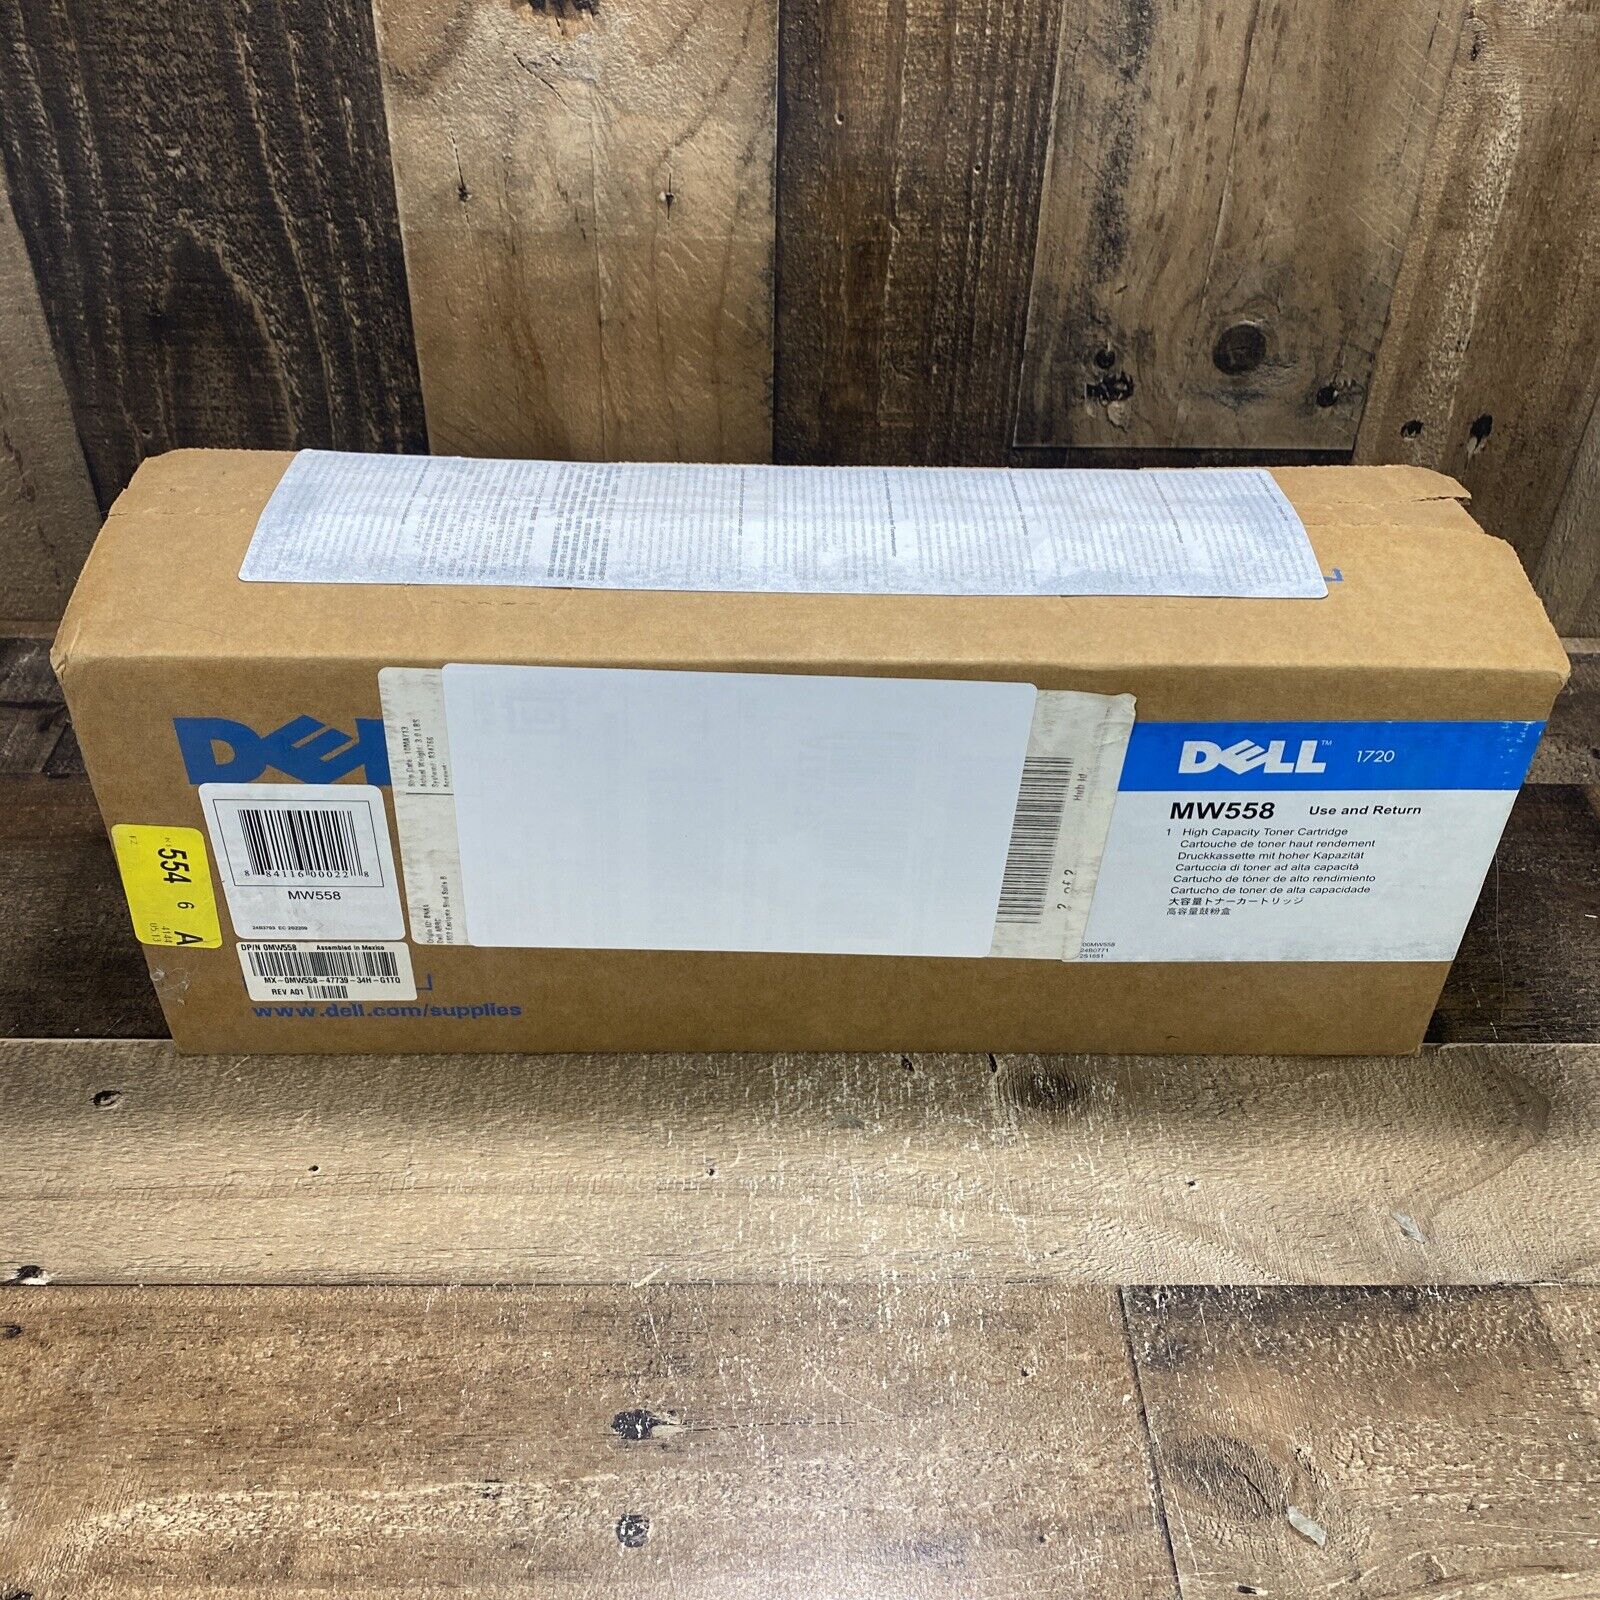 Genuine Dell MW558 1720 Black Toner Cartridge - 6000 Page Yield New in Box